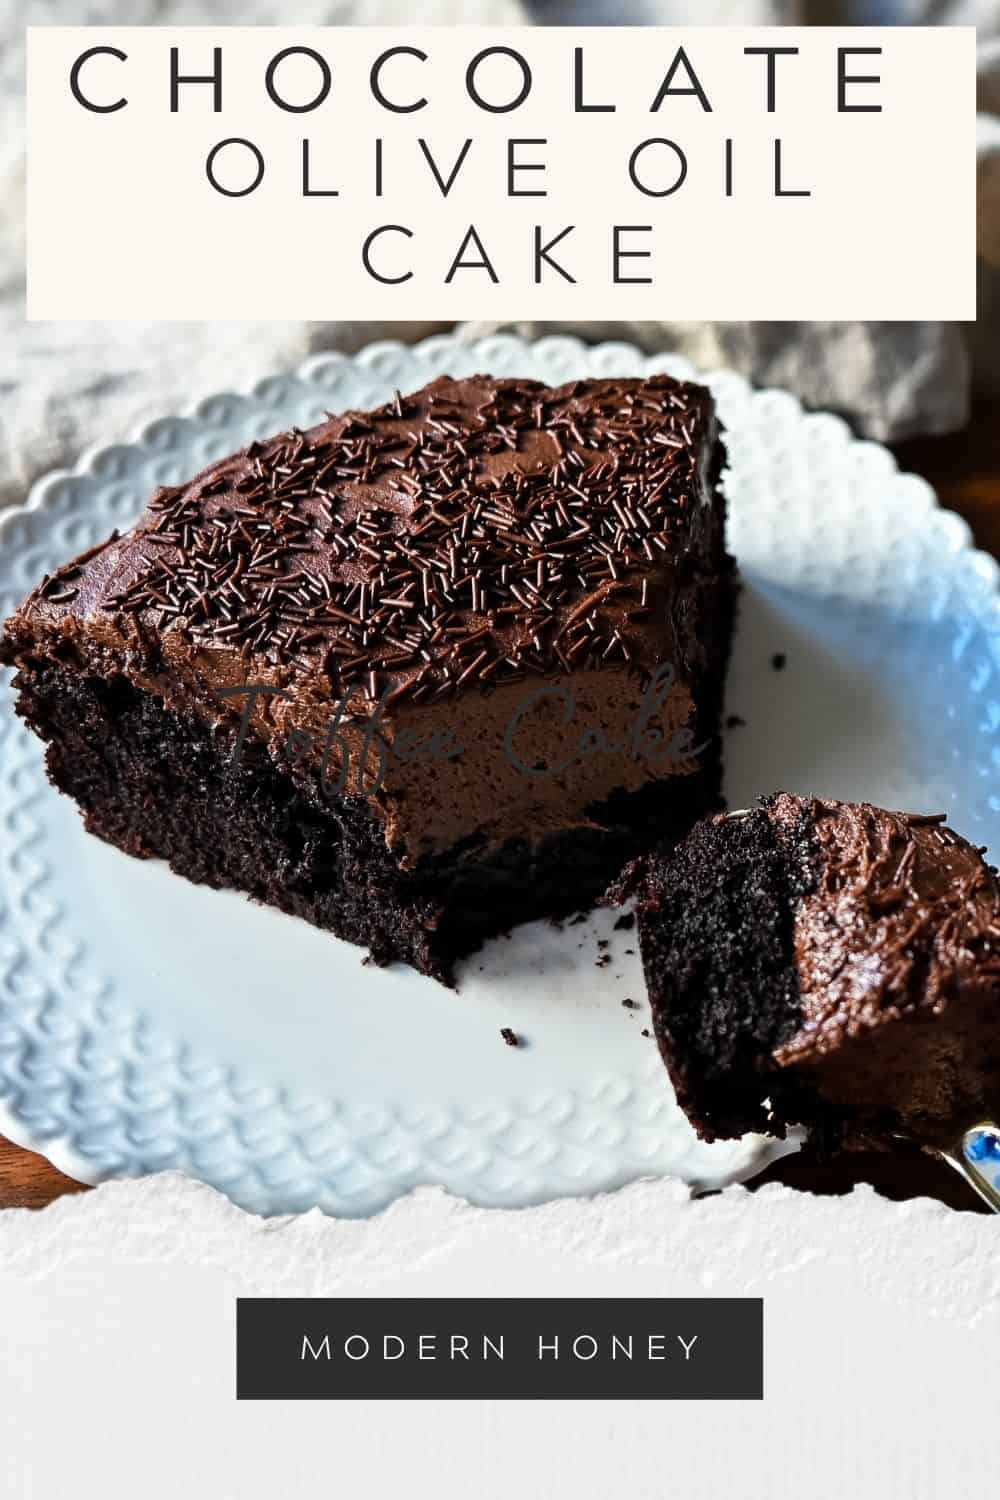 Chocolate Olive Oil Cake with Chocolate Frosting. Moist, rich chocolate cake made with olive oil and frosted with a homemade chocolate buttercream frosting. This is a decadent frosted chocolate cake recipe.